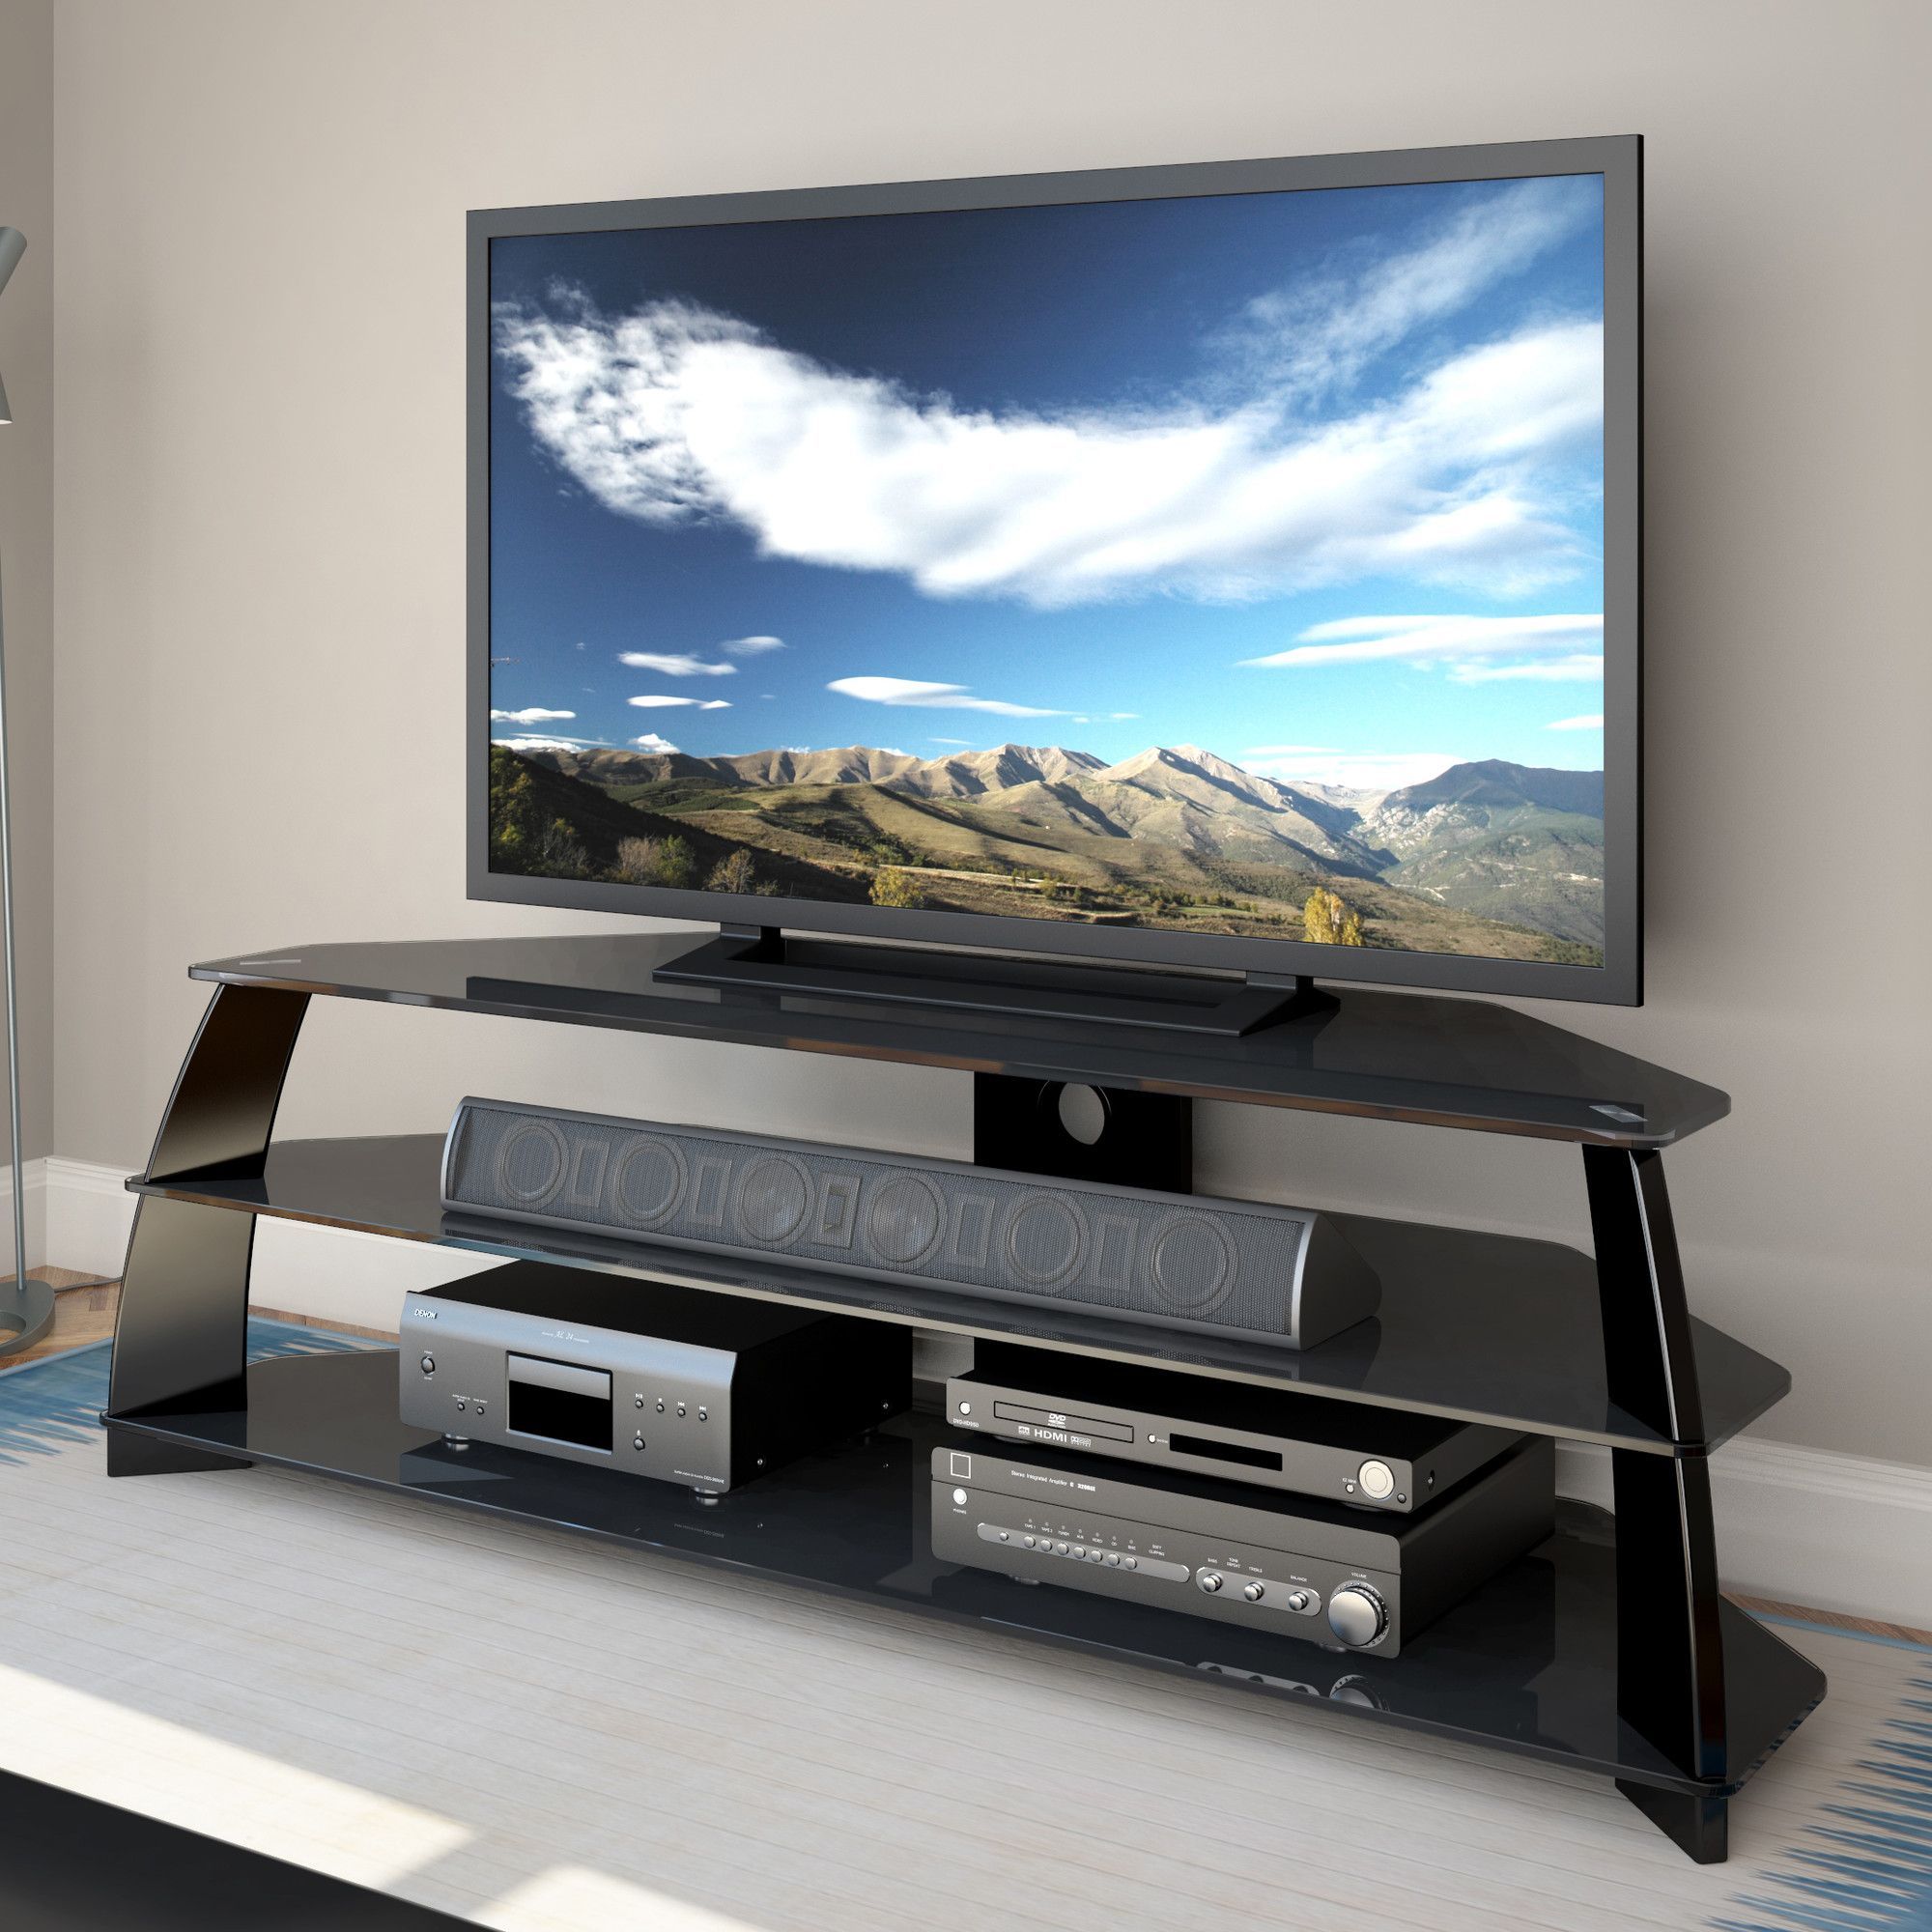 Online Home Store For Furniture, Decor, Outdoors & More For Valenti Tv Stands For Tvs Up To 65" (View 6 of 15)